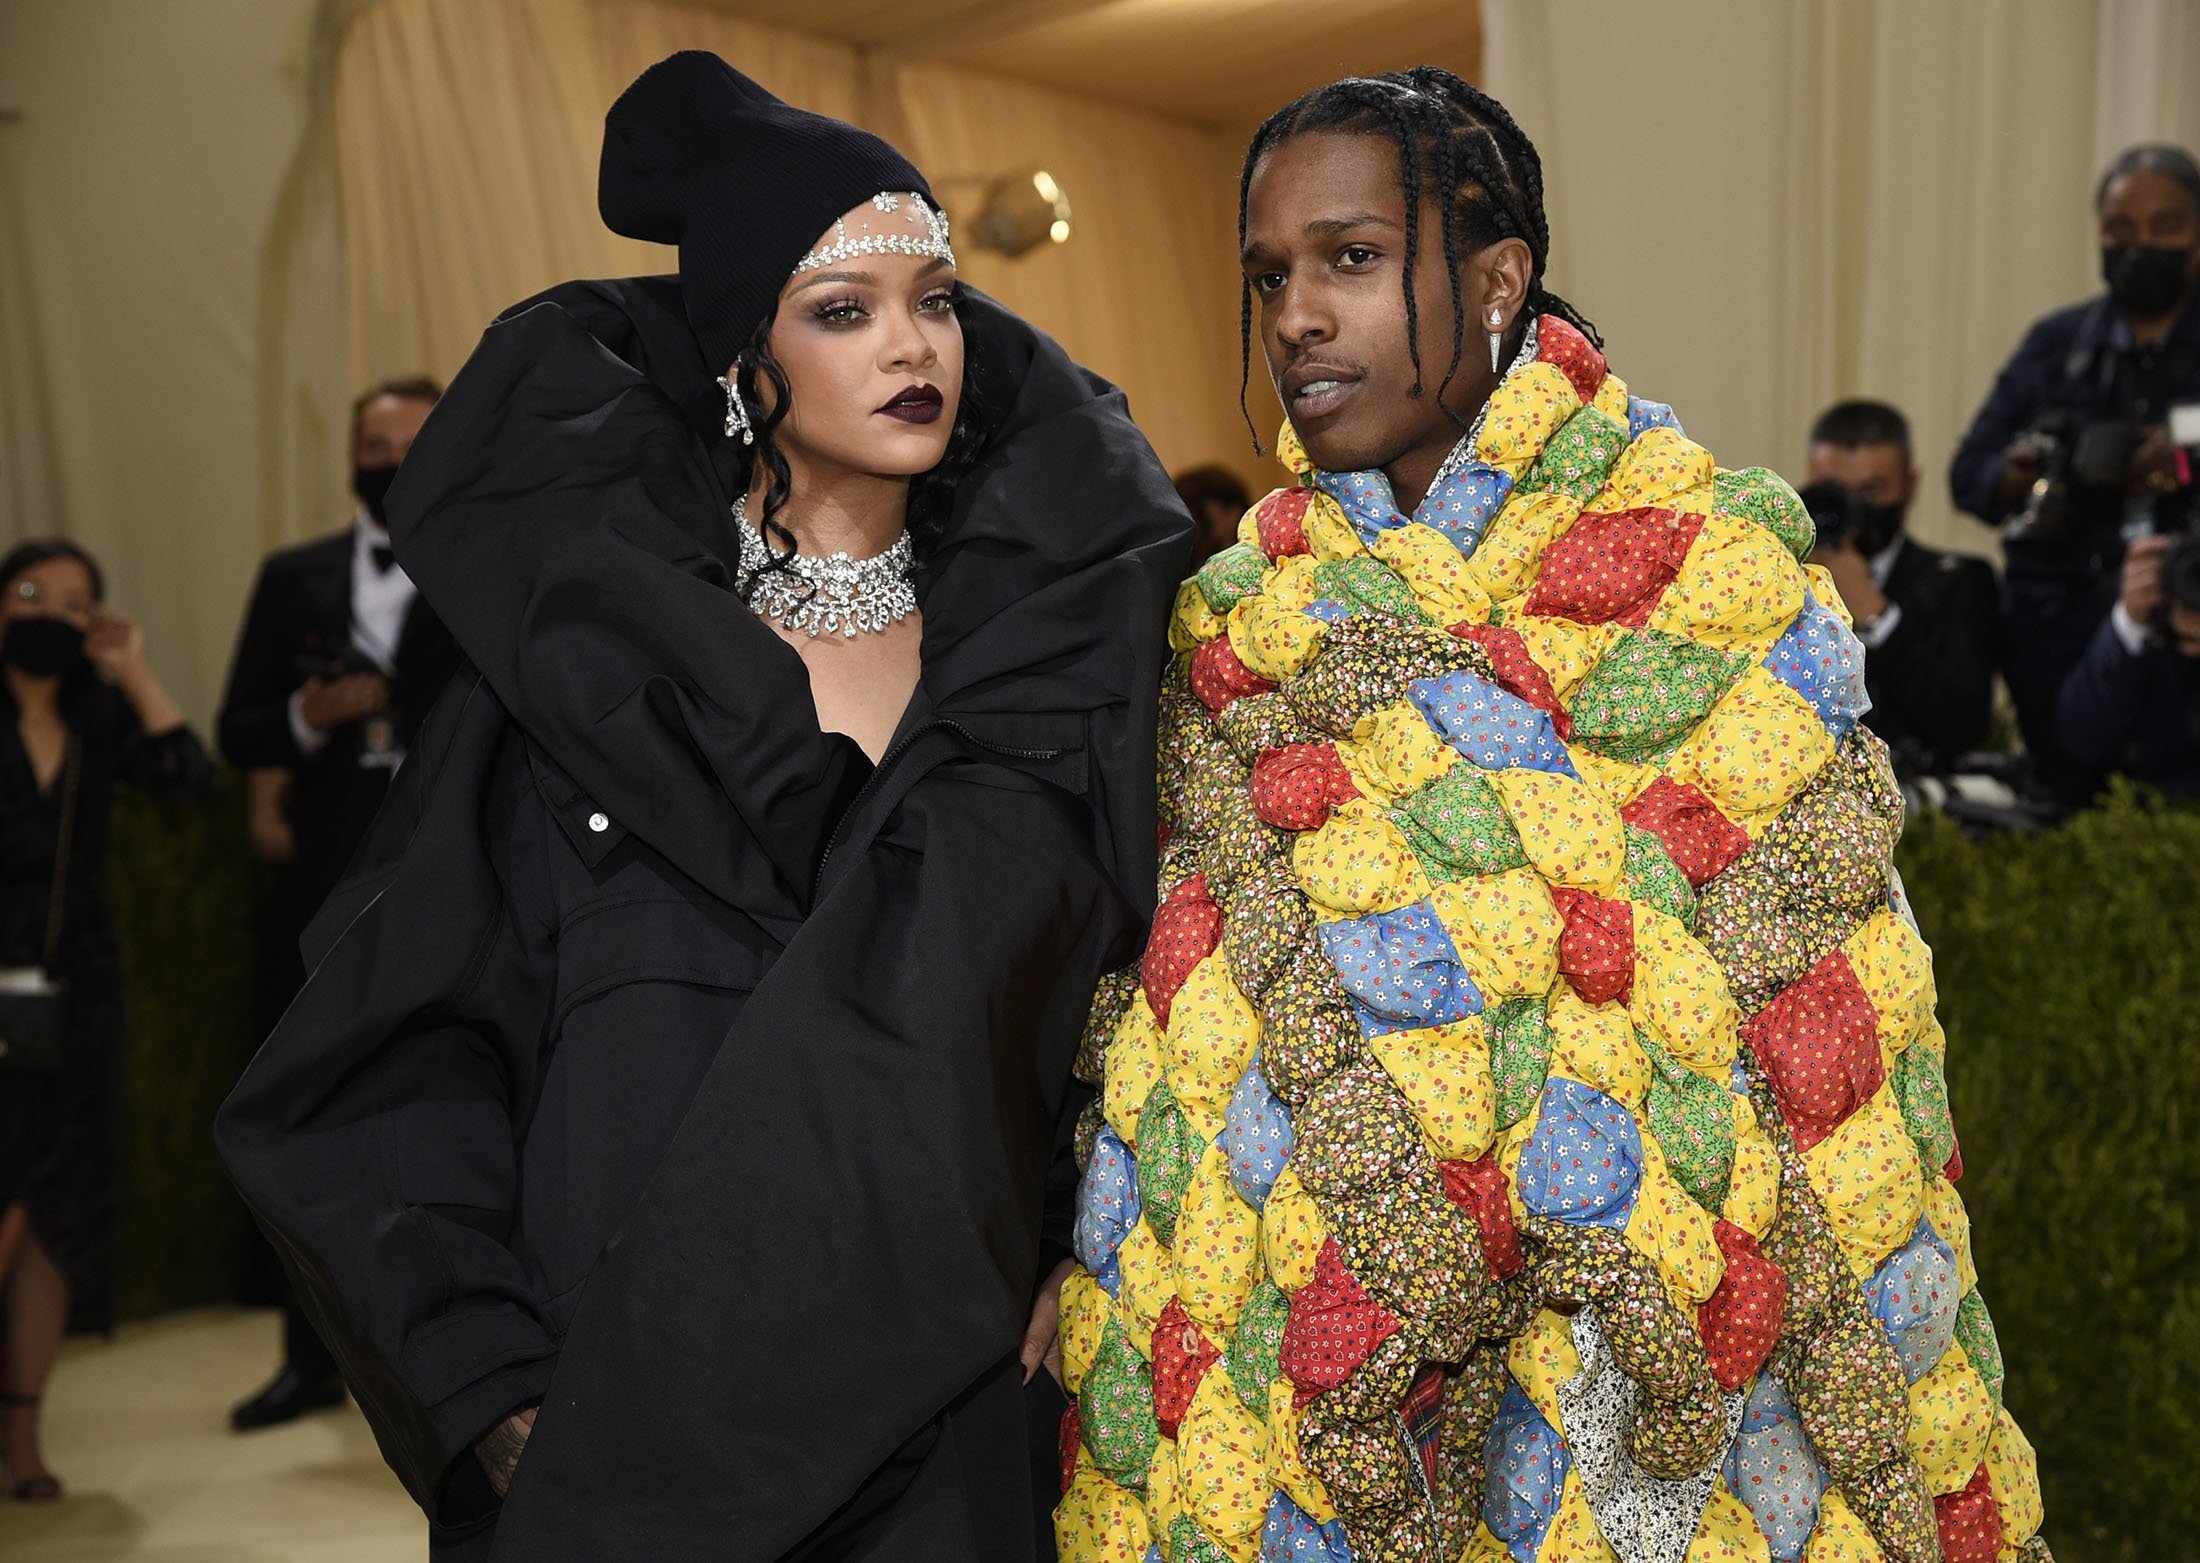 Rihanna (L) and A$AP Rocky arrive for the 2021 Met Gala at the Metropolitan Museum of Art, in New York, U.S., Sept. 13, 2021. (AP Photo)